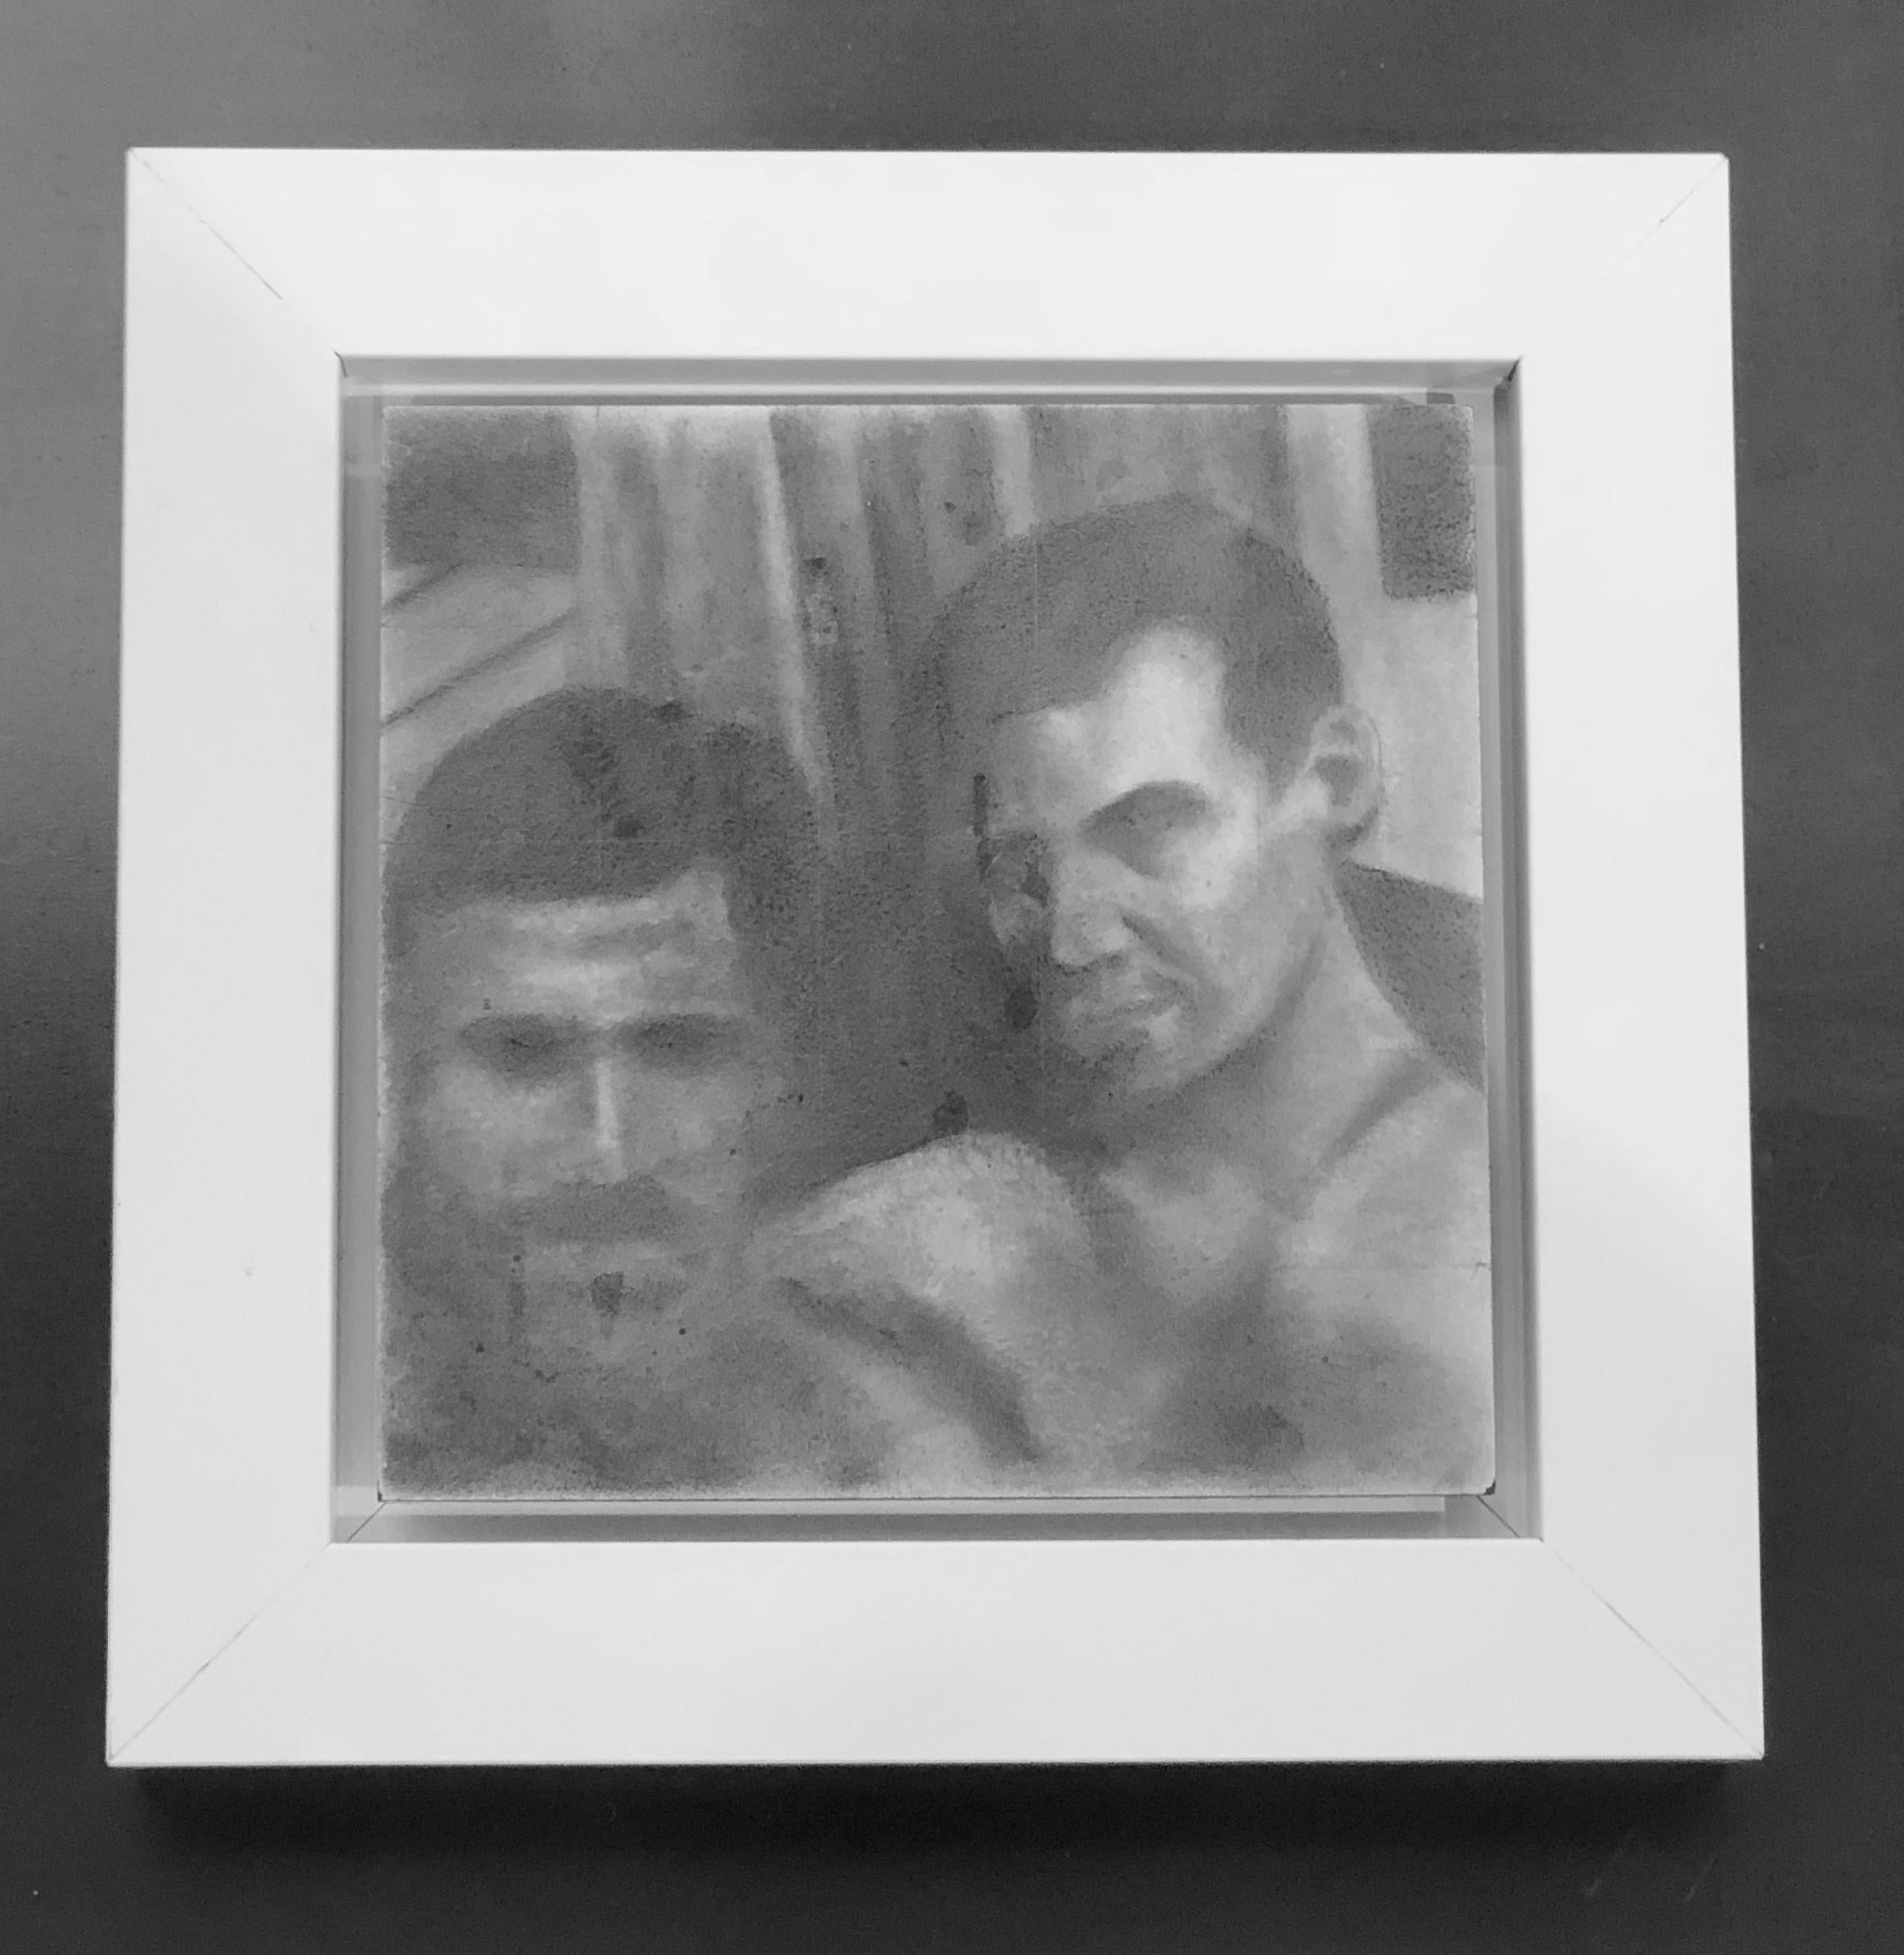 Untitled #1 - Two Male Figures Gaze at Viewer, Original Graphite Drawing - Art by Rick Sindt